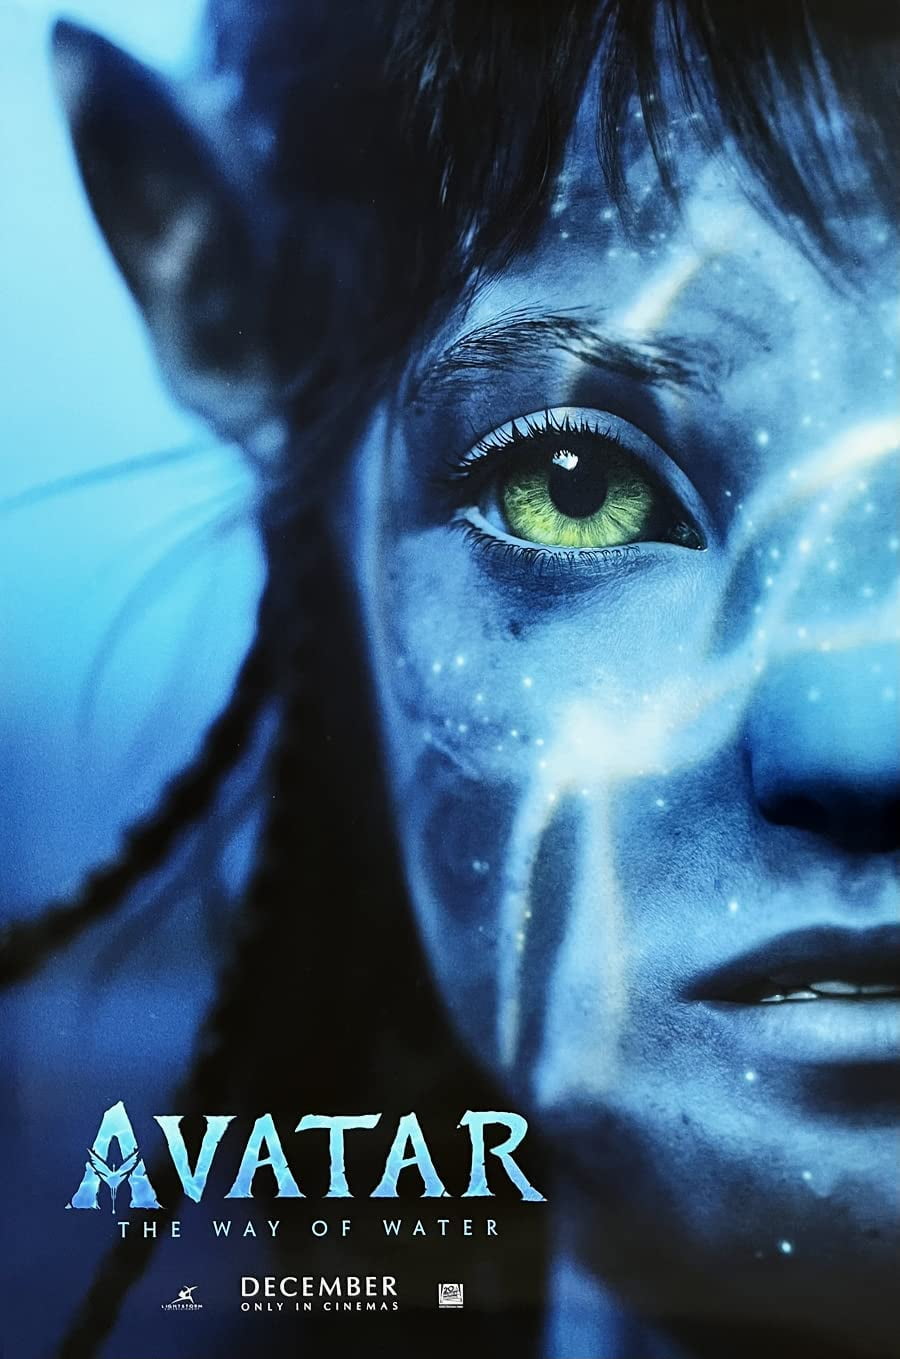 Amazoncom Kerry dober Avatar The Way of Water Movie Poster Cool Wall  Decor Art Print Posters for Room Aesthetic  Matte Poster Frameless Gift 11  x 17 inch28cm x 43cm Posters 